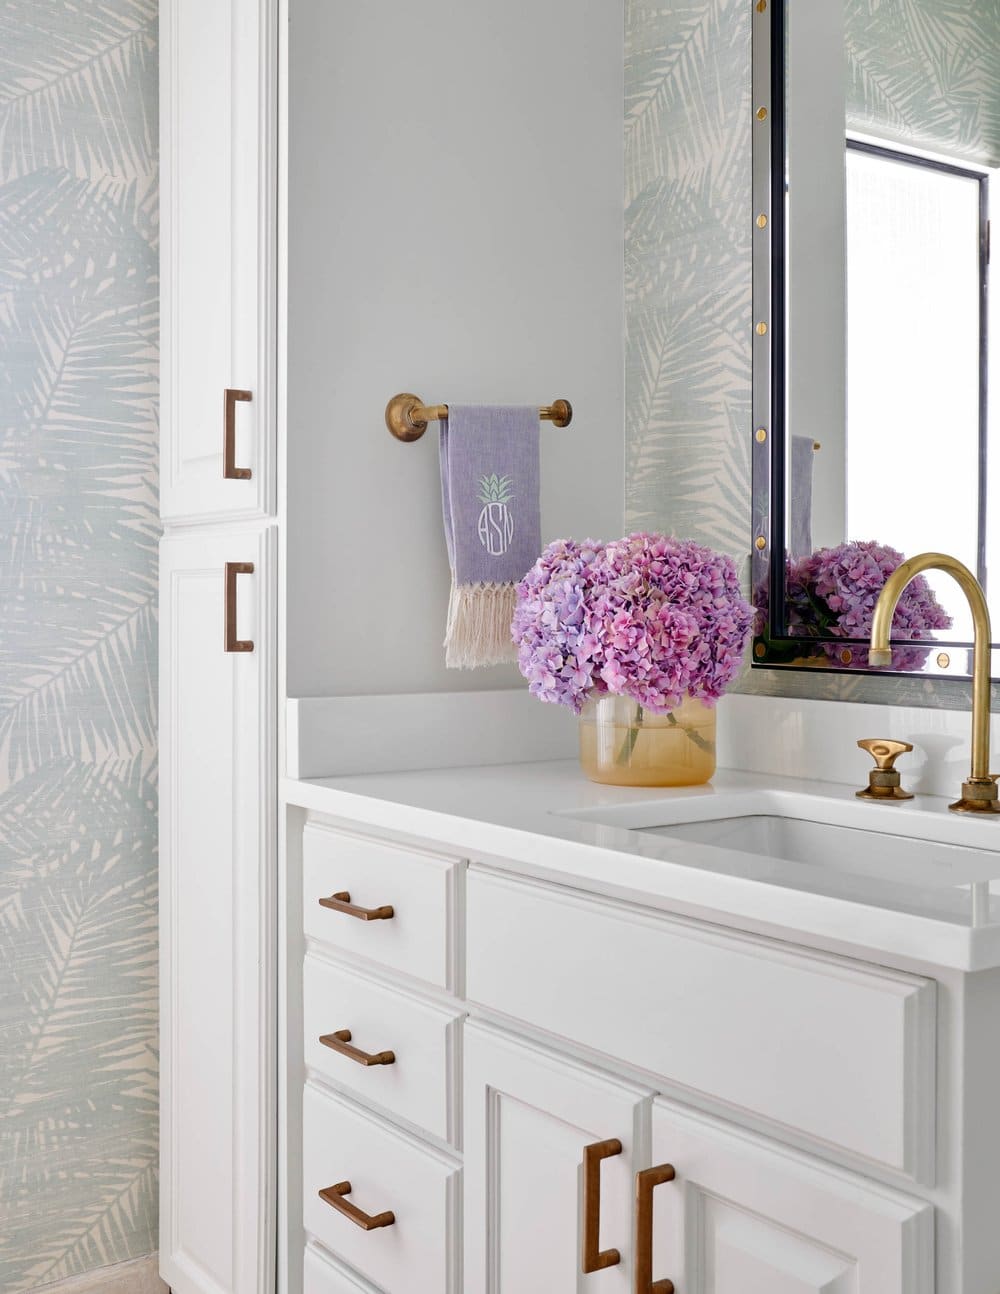 Delightful Dallas home from Designer Mary Beth Williams | Photography Nathan Schroder. Love the beautiful wallpaper in this bathroom